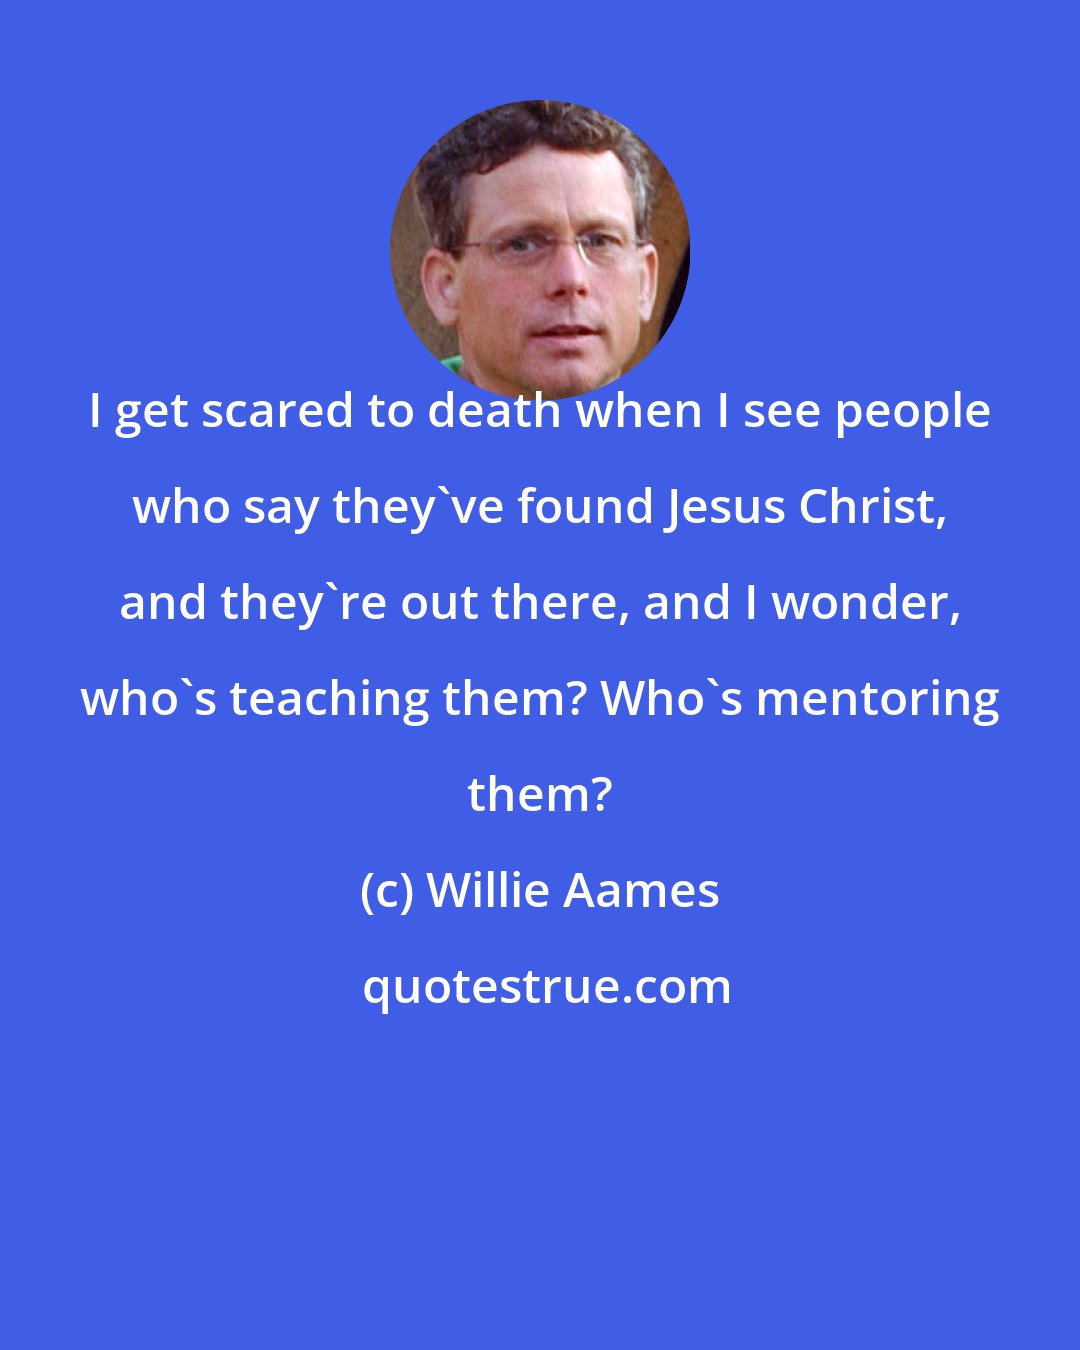 Willie Aames: I get scared to death when I see people who say they've found Jesus Christ, and they're out there, and I wonder, who's teaching them? Who's mentoring them?